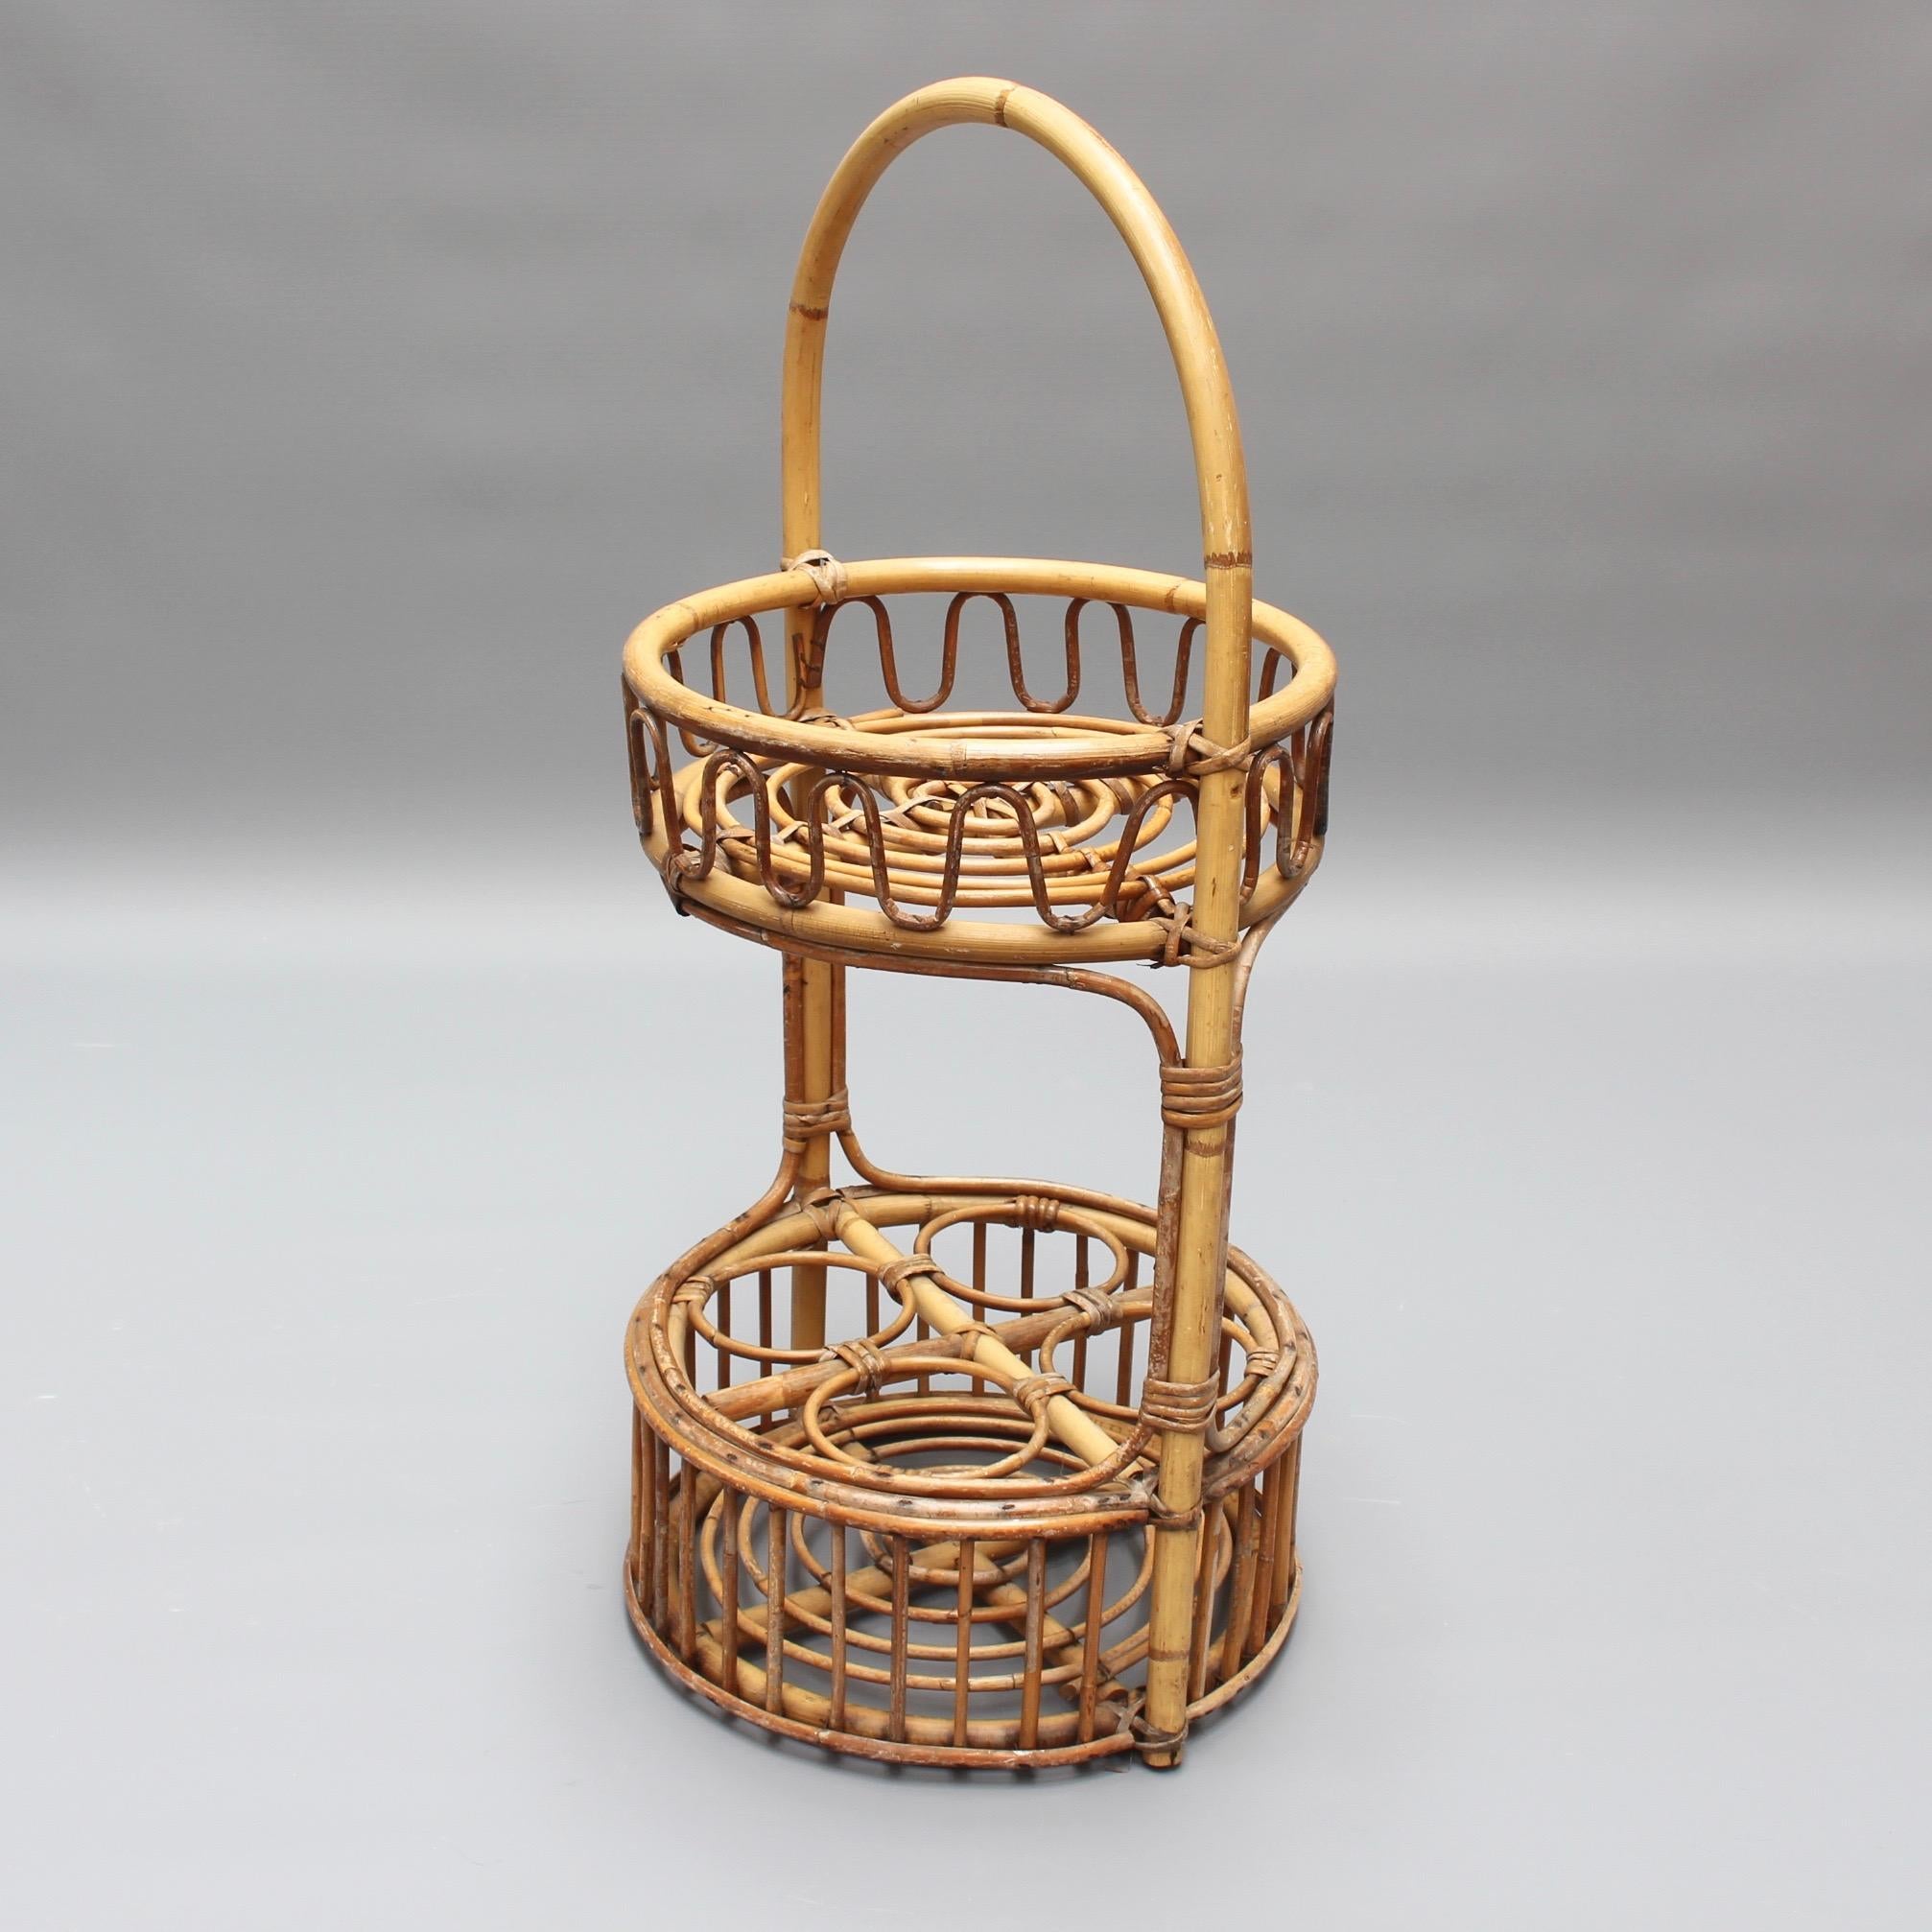 Vintage French rattan drinks rack, (circa 1960s). This is a charming piece with upper and lower horizontal surfaces with concentric circular rattan design held in place by two vertical canes. The lower level has four holding rings for your best